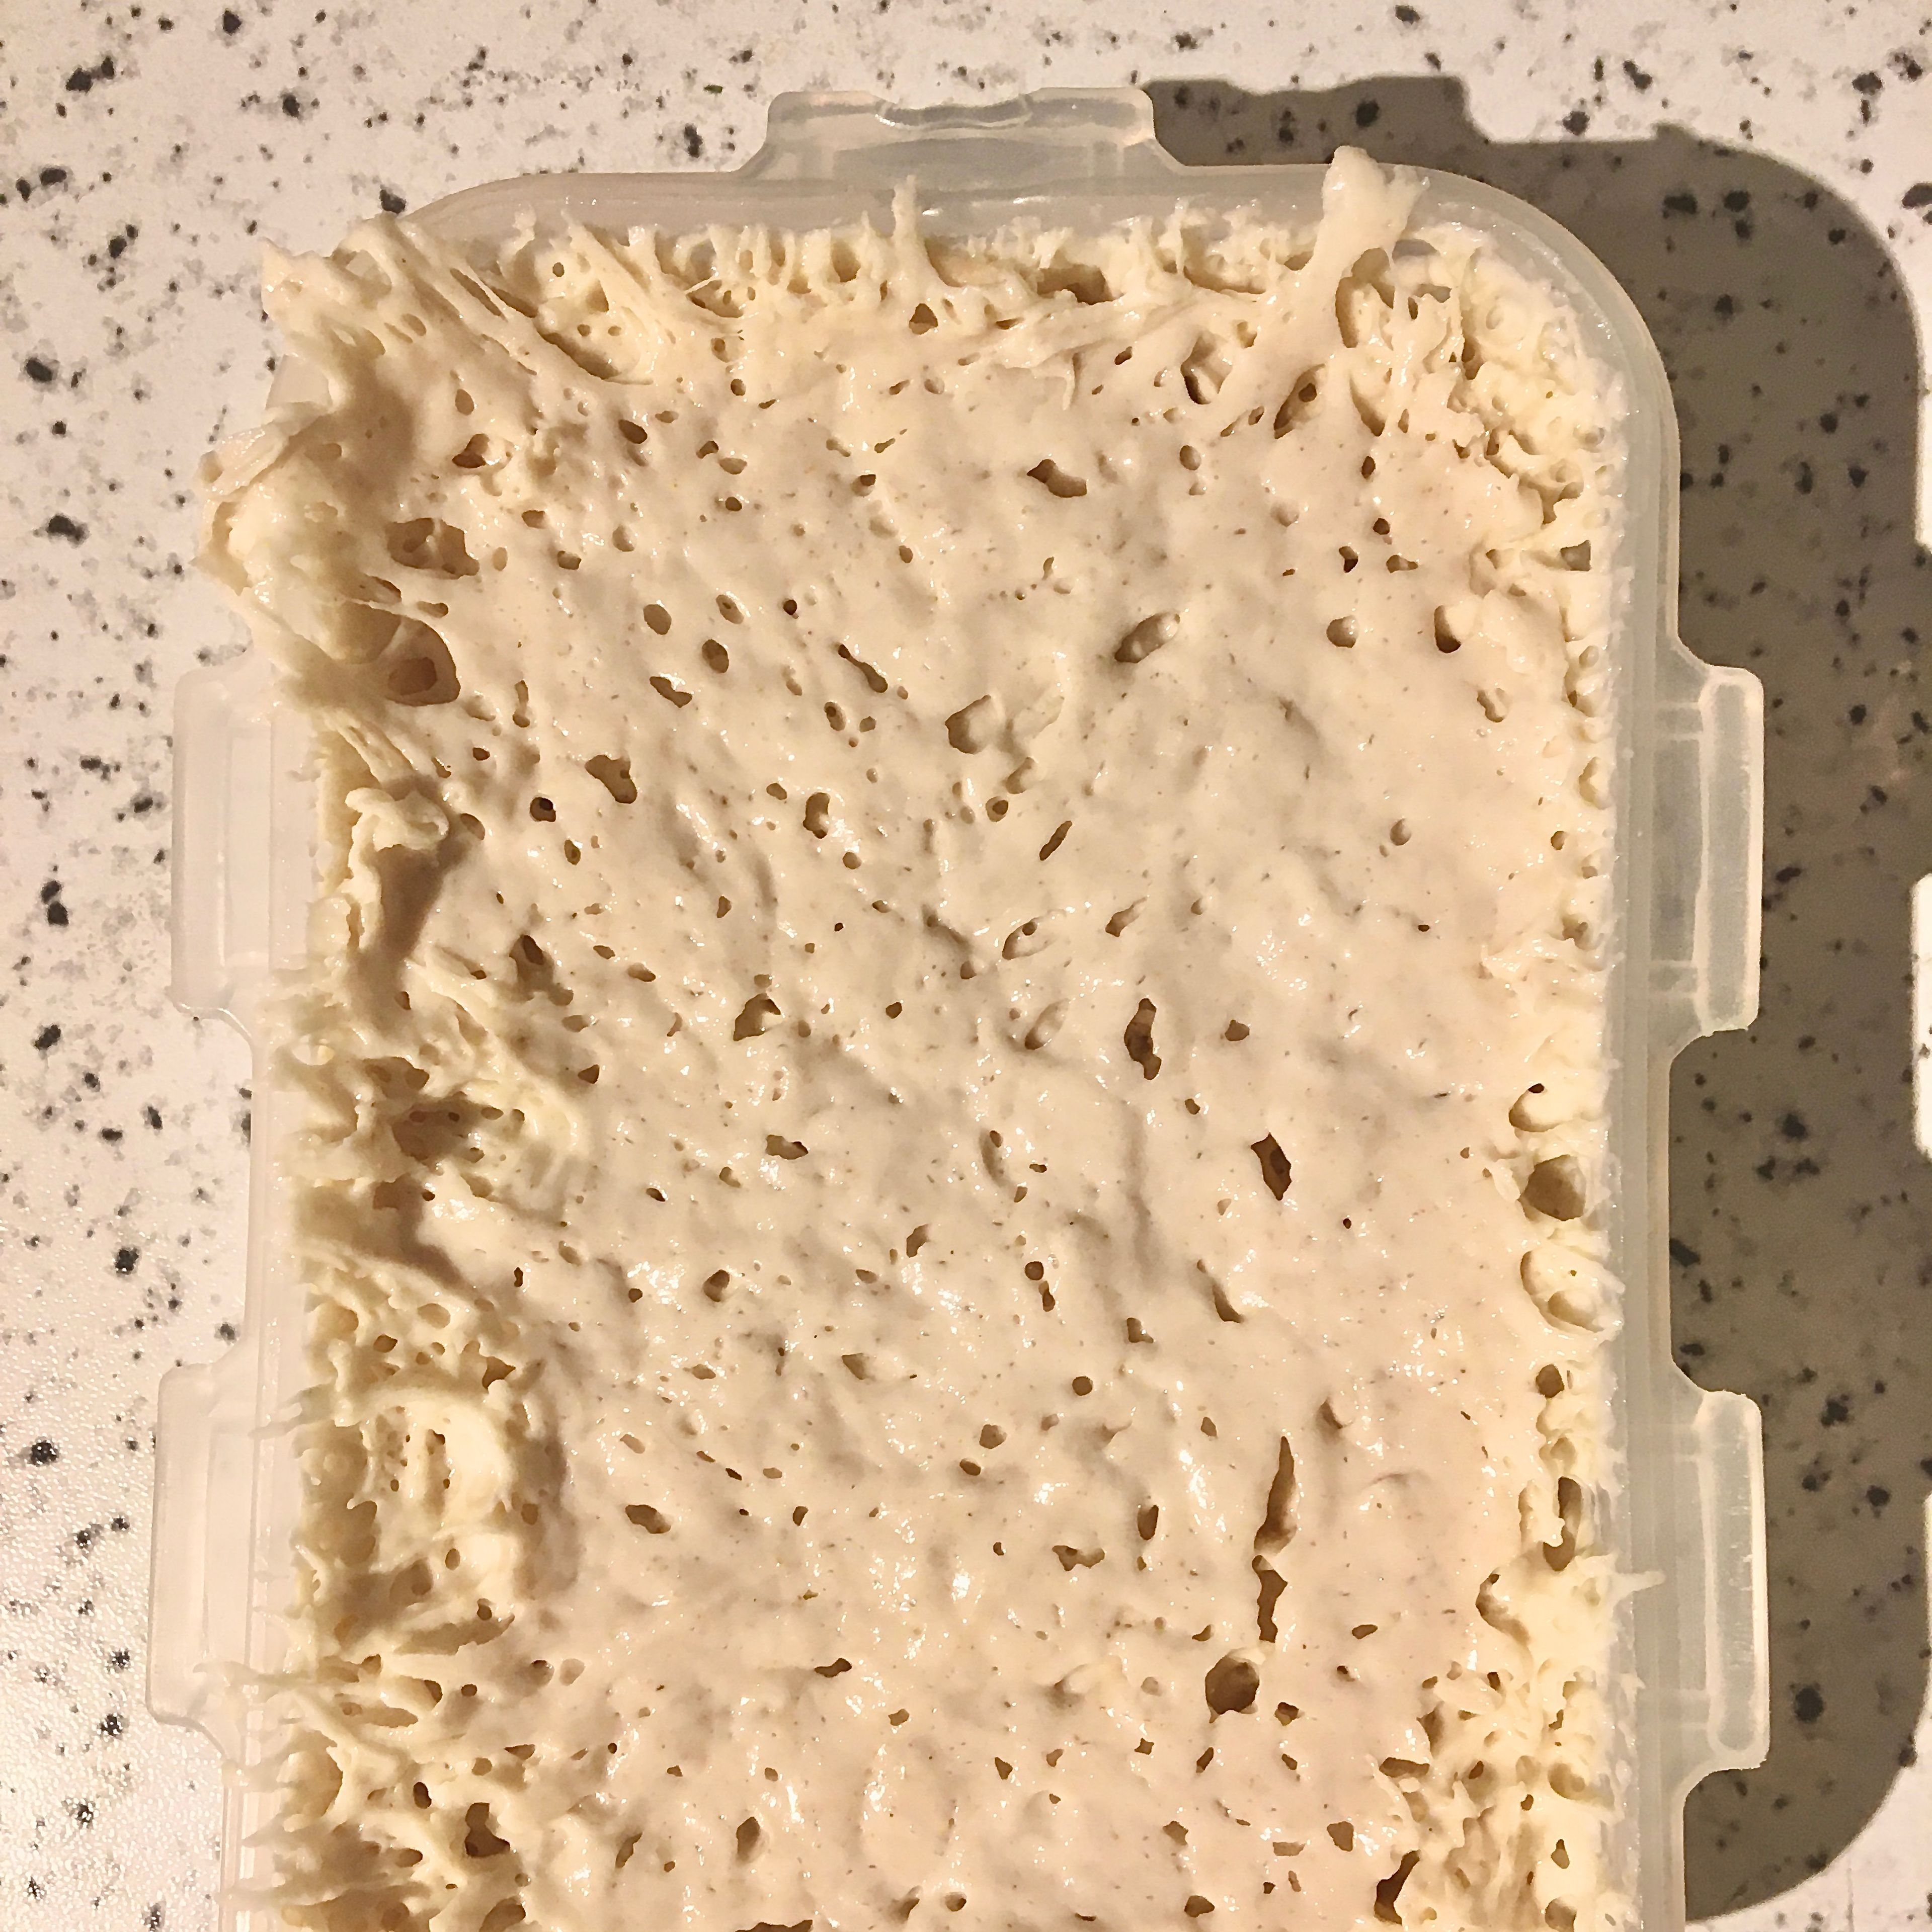 In a small bowl, mix together 140 g flour with yogurt, water, a very tiny pinch of yeast and a bit salt. Mix until a smooth dough forms. This is your starter that should rise in an airtight container until fizzy and smells bread-like sourness, 8-10 hours or up to one night.